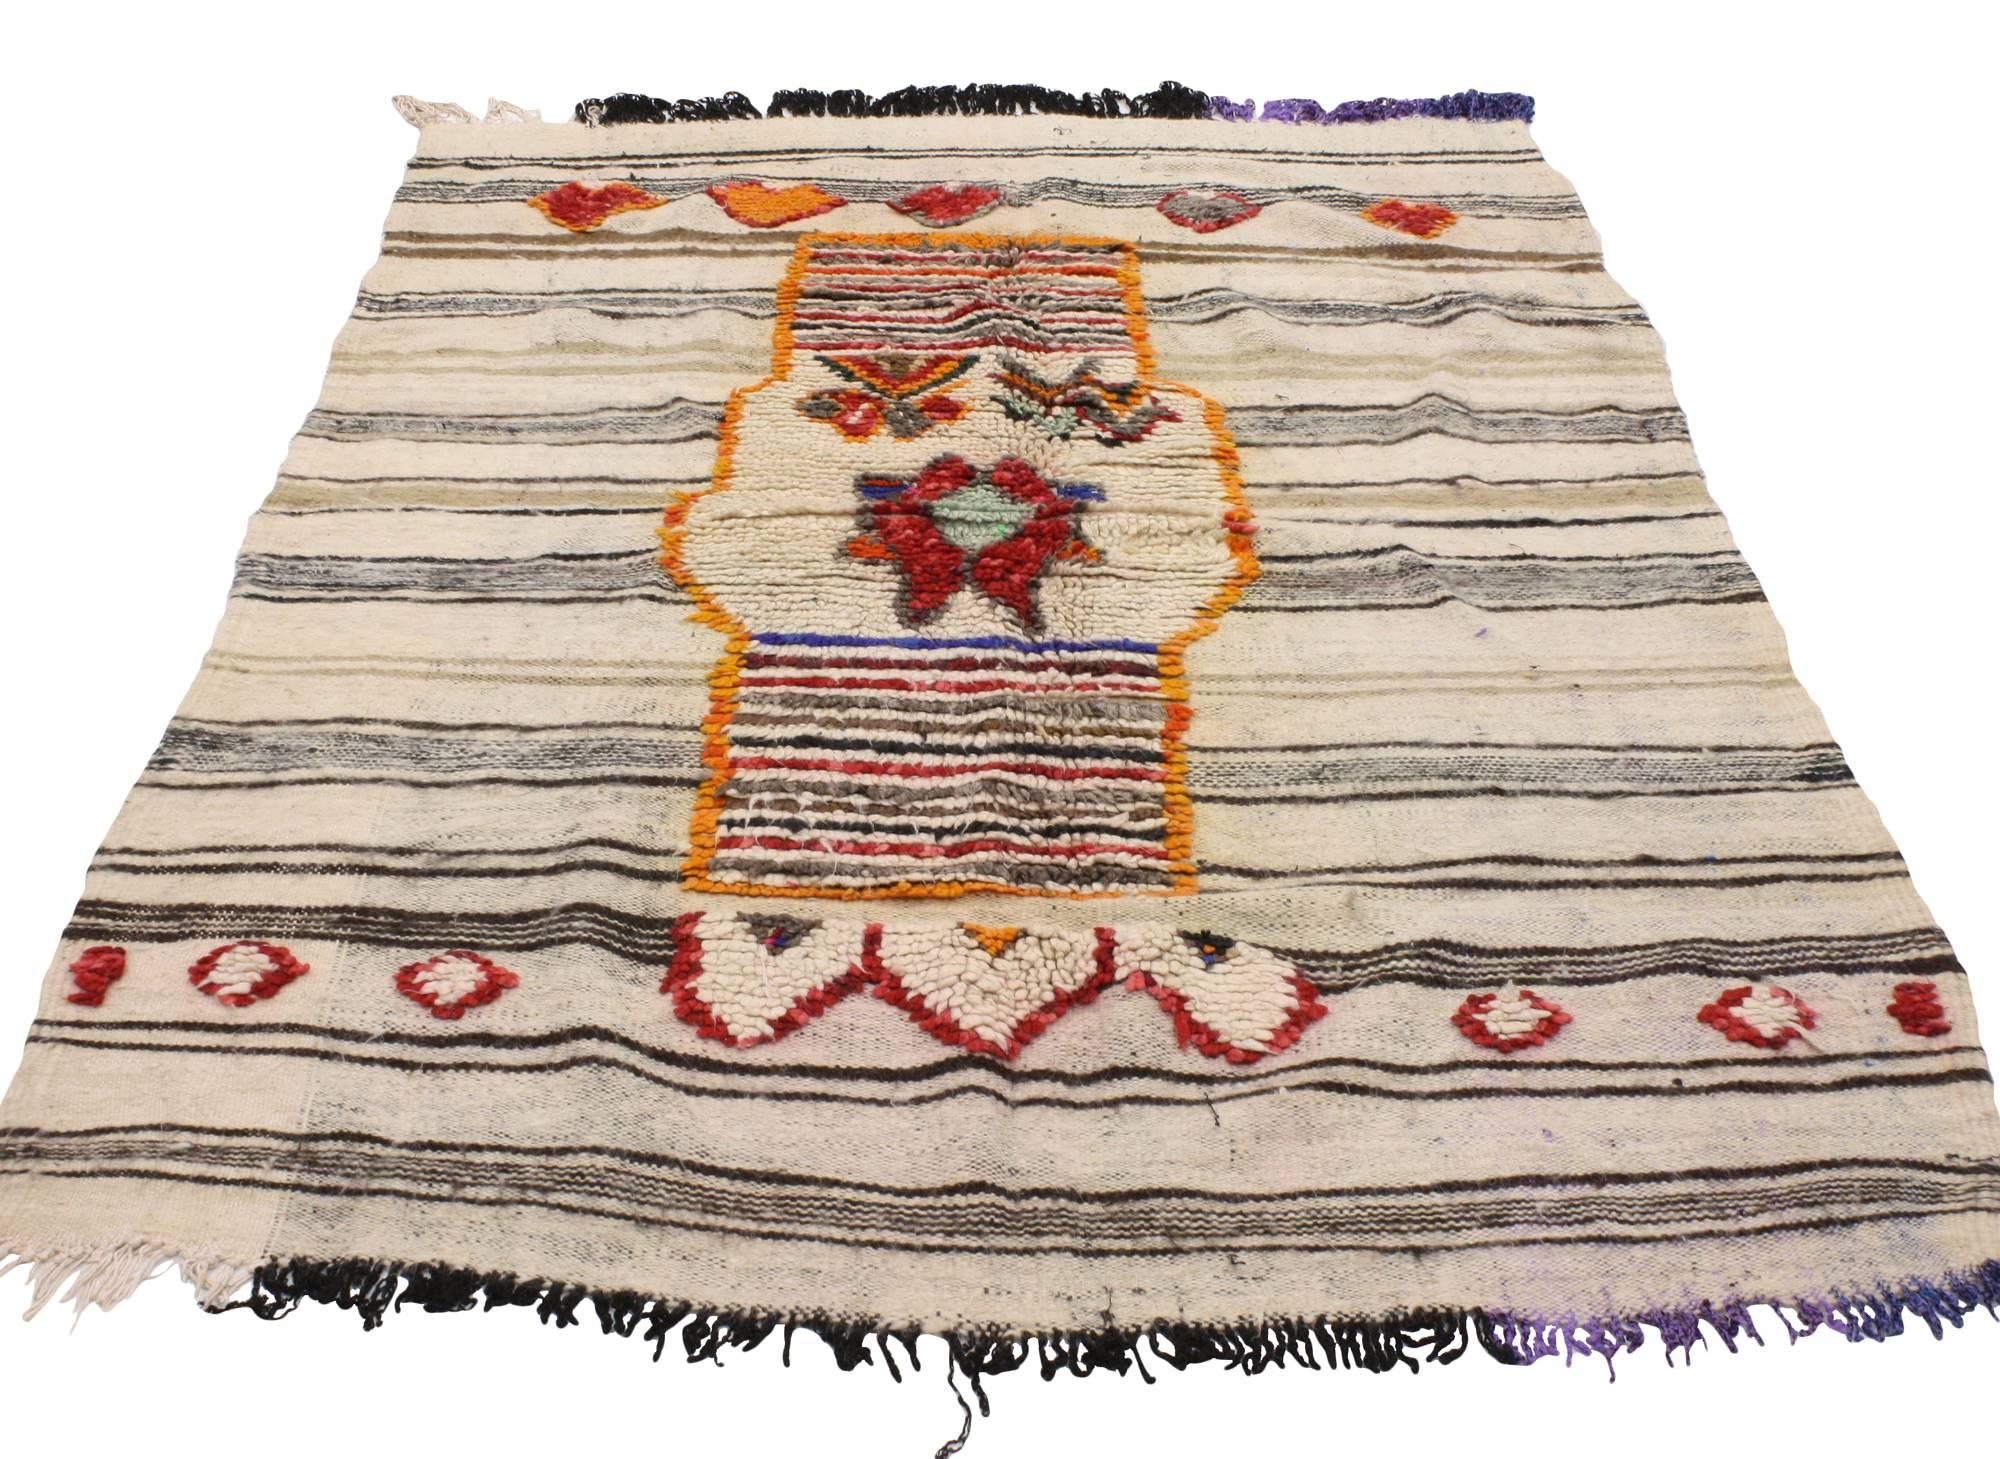 20456, vintage Berber Moroccan Kilim rug. Creamy beige sets the stage for earth-tone horizontal stripes and vibrant tribal design. The stark contrast of the red and orange colors woven into this vintage Berber Moroccan Kilim rug create a unique